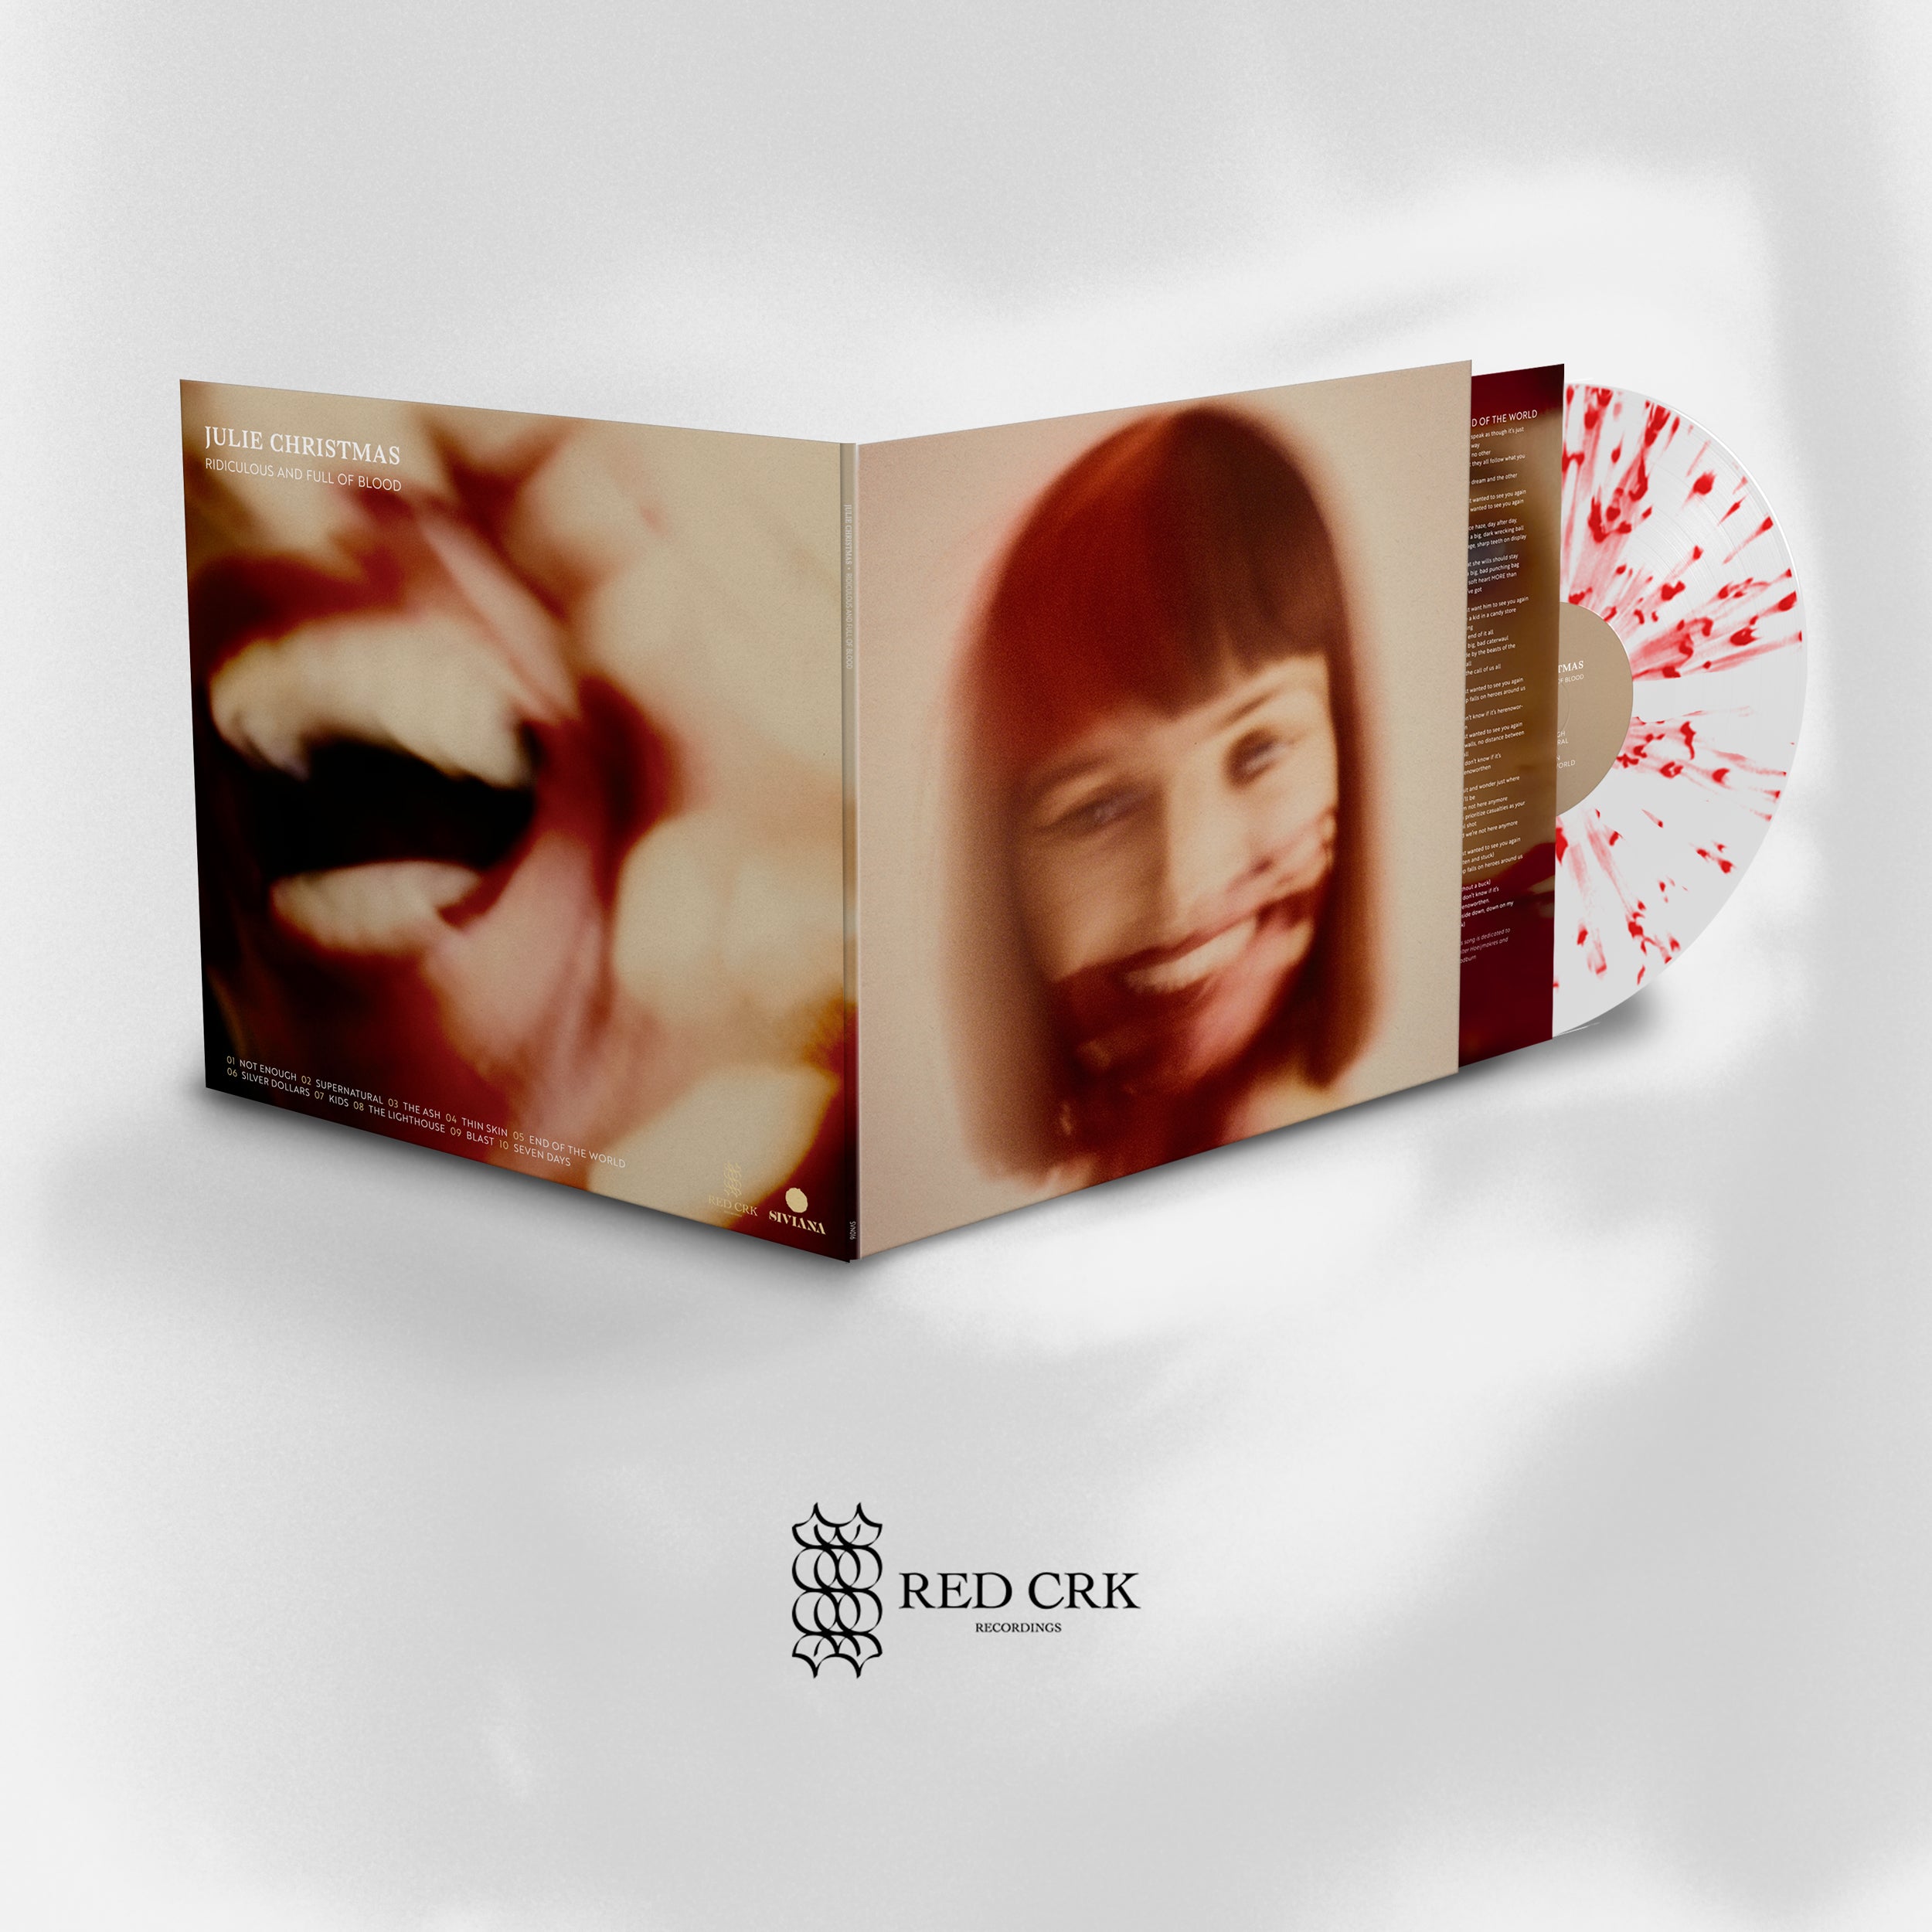 JULIE CHRISTMAS - Ridiculous And Full Of Blood Transparent w/Blood Red Splatter LP LTD TO 300 (Pre-Order)